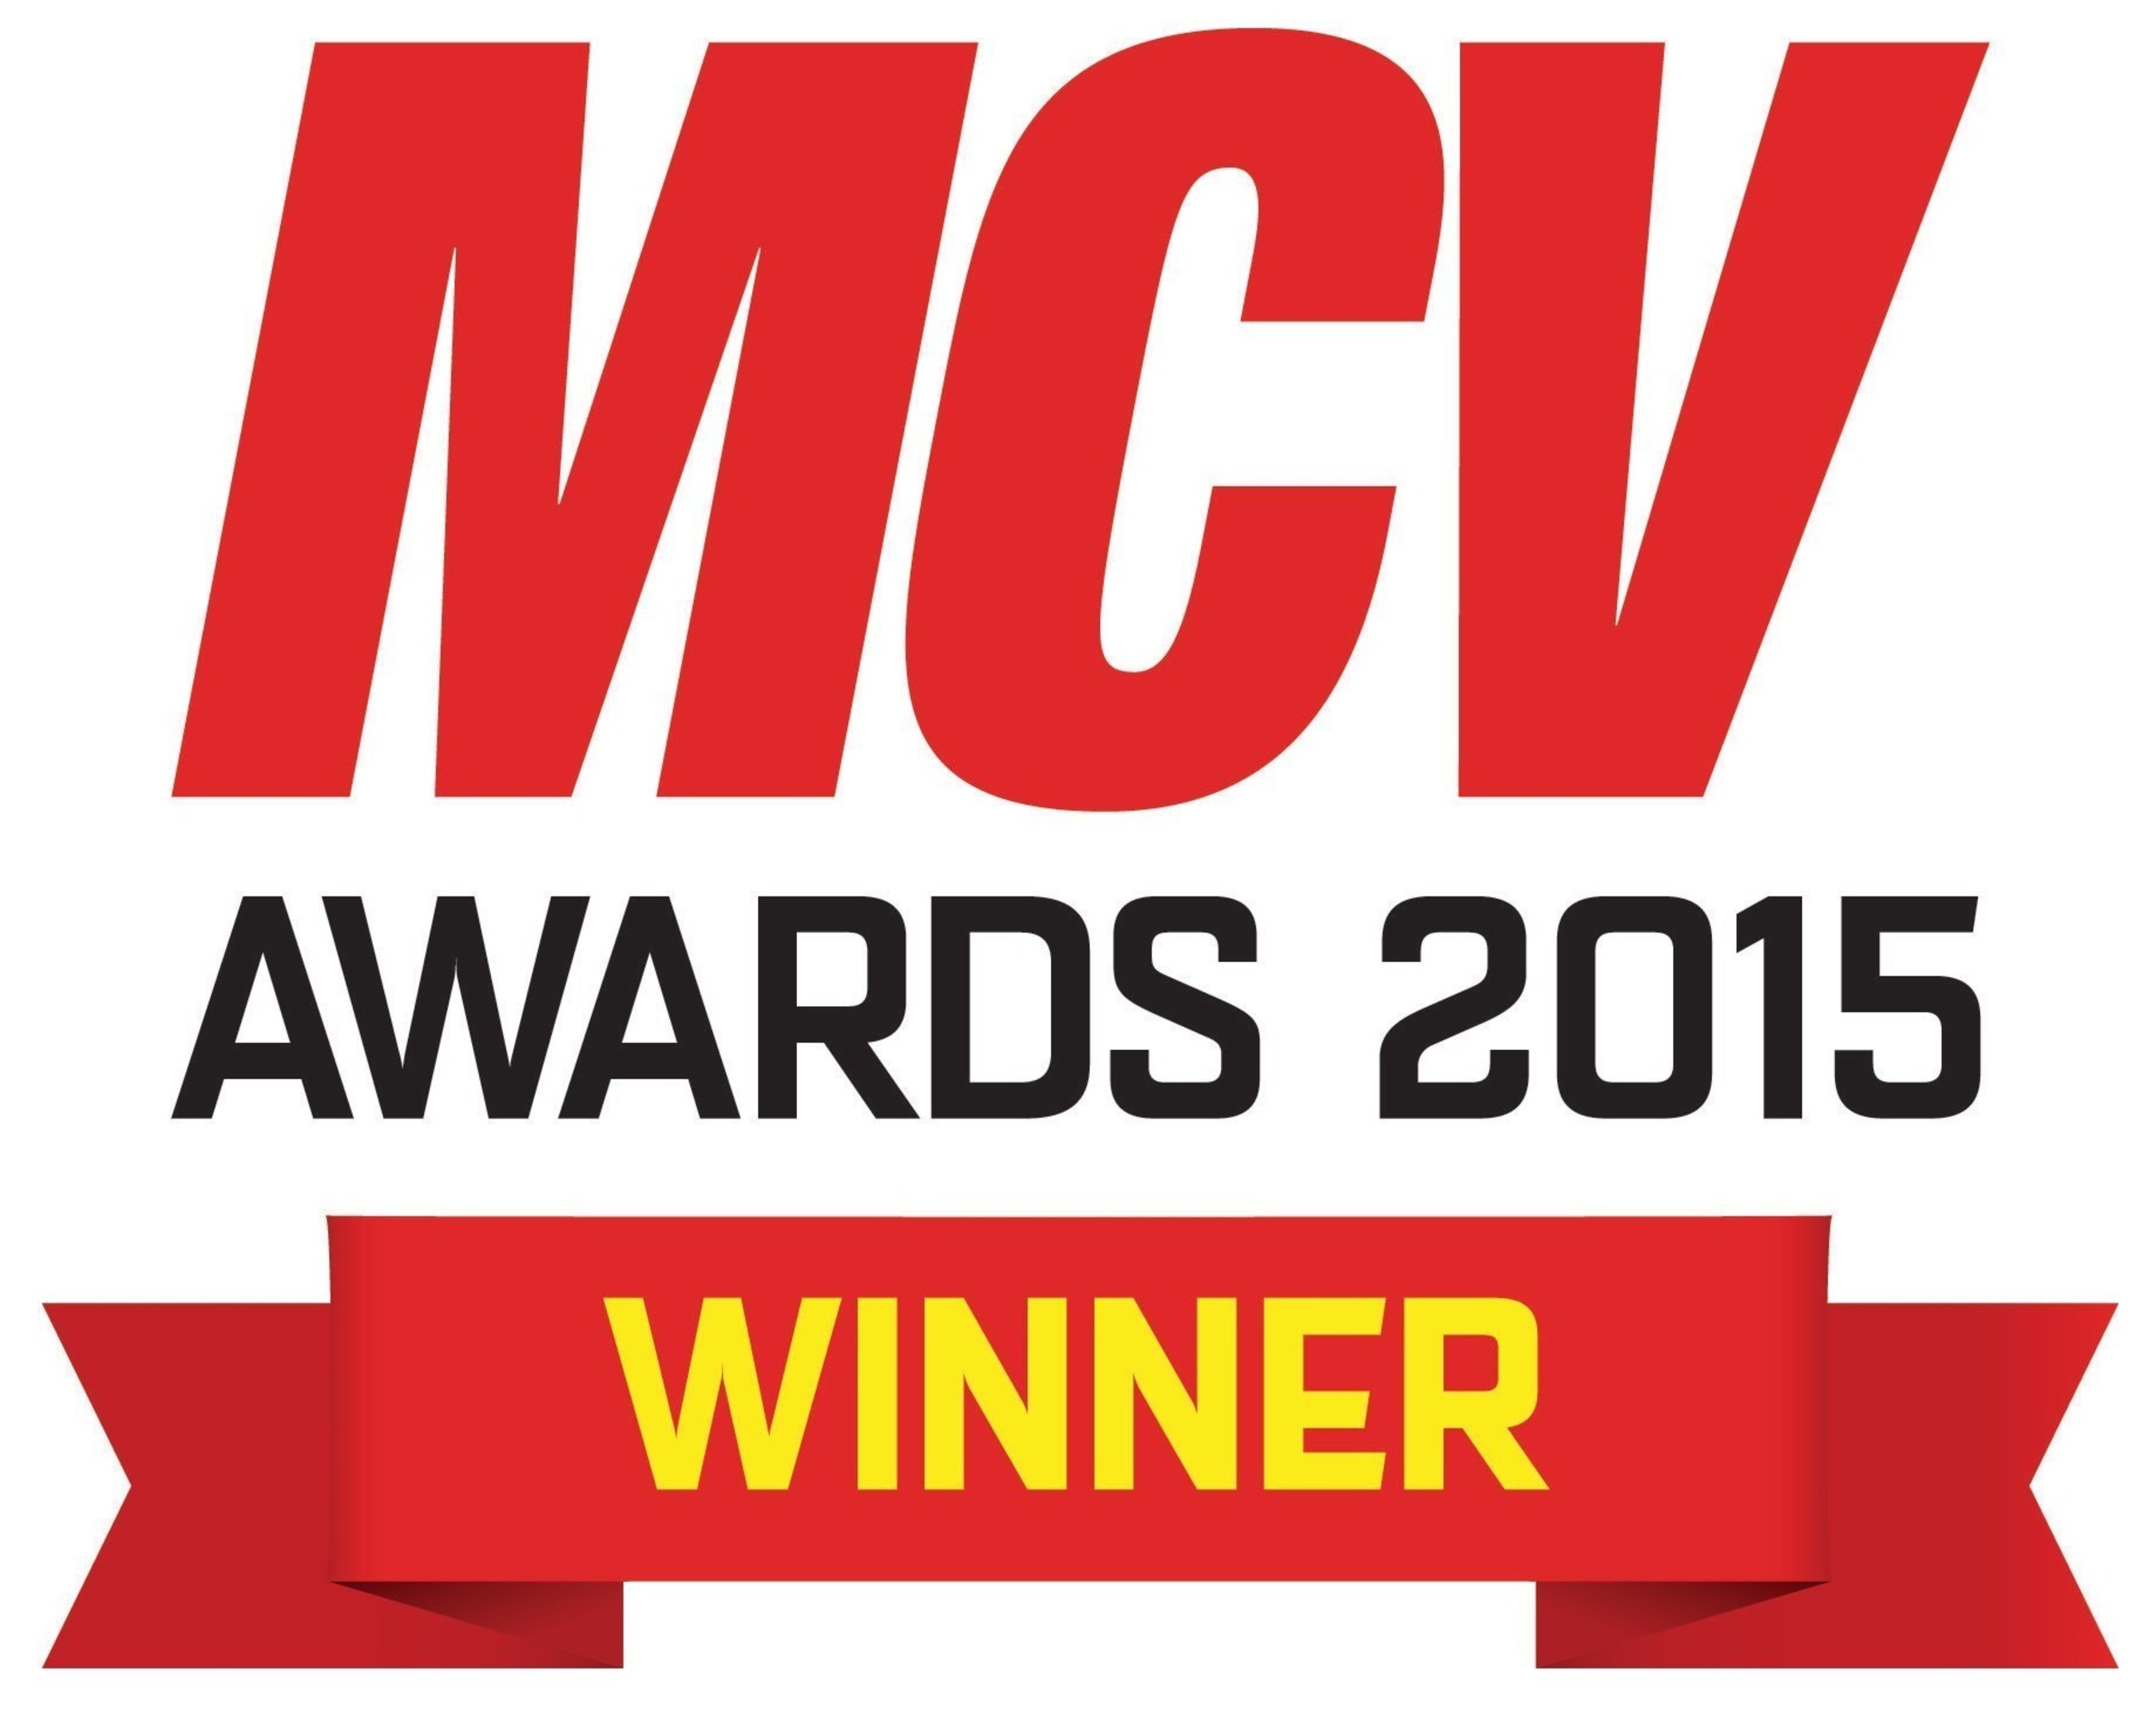 TURTLE BEACH WINS "BEST PERIPHERALS AND ACCESSORIES BRAND" HONORS SECOND YEAR IN A ROW AT UK VIDEO GAME INDUSTRY'S MCV AWARDS